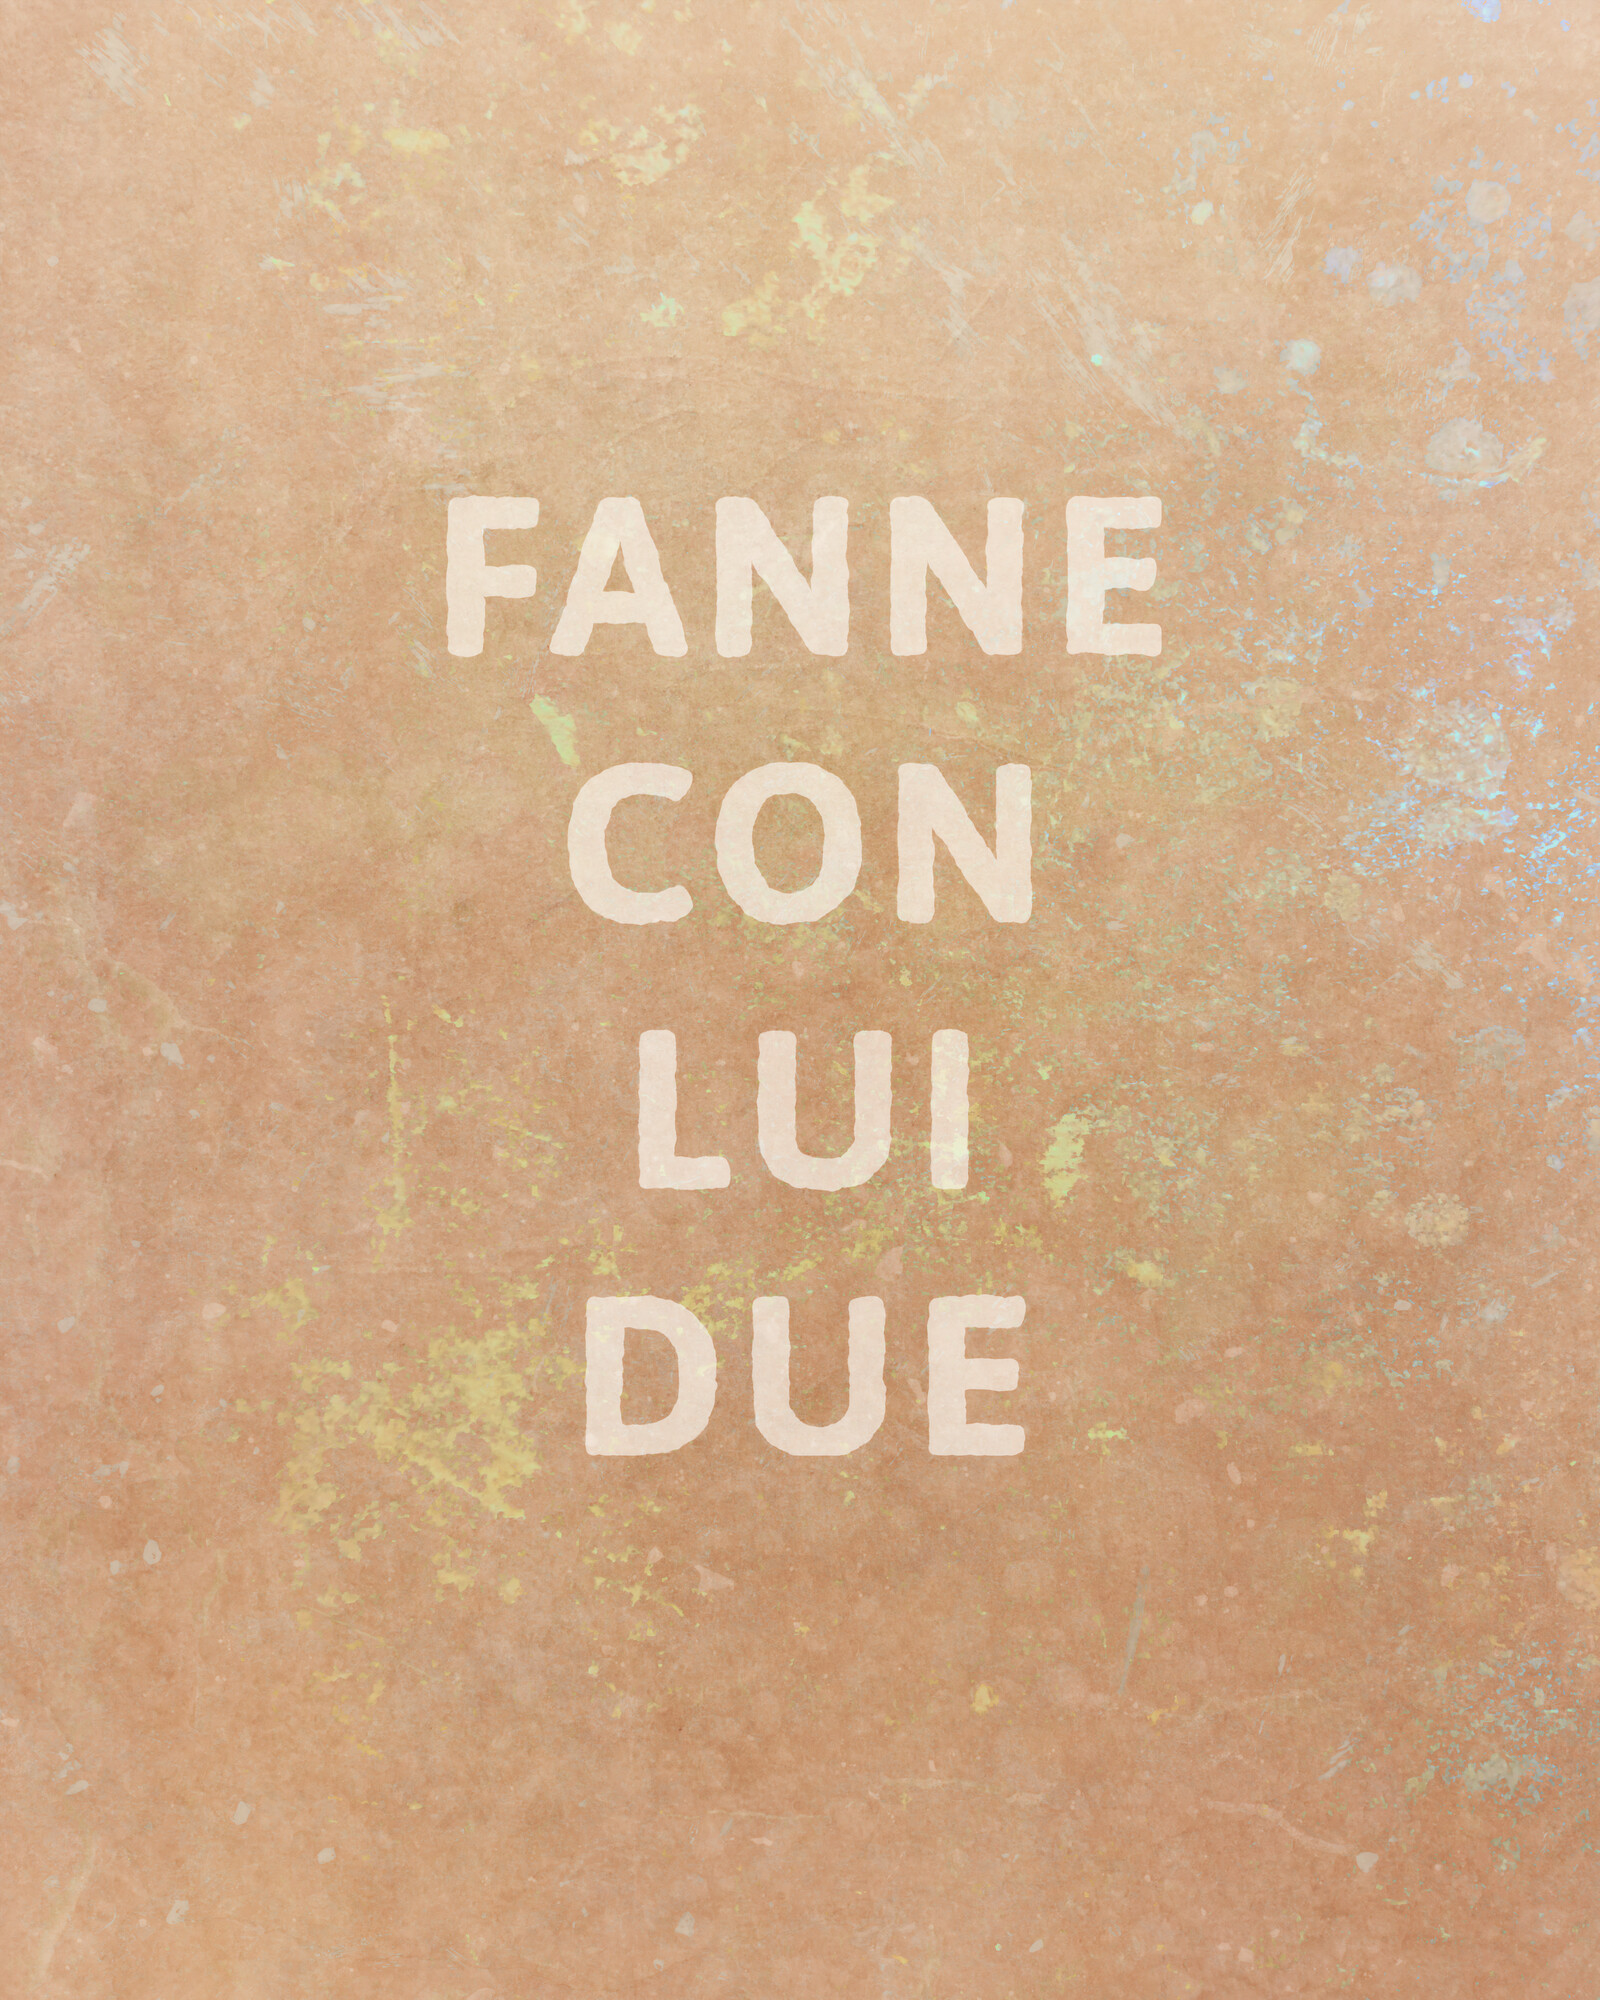 Art with the words "Fanne con lui due" laid out vertically